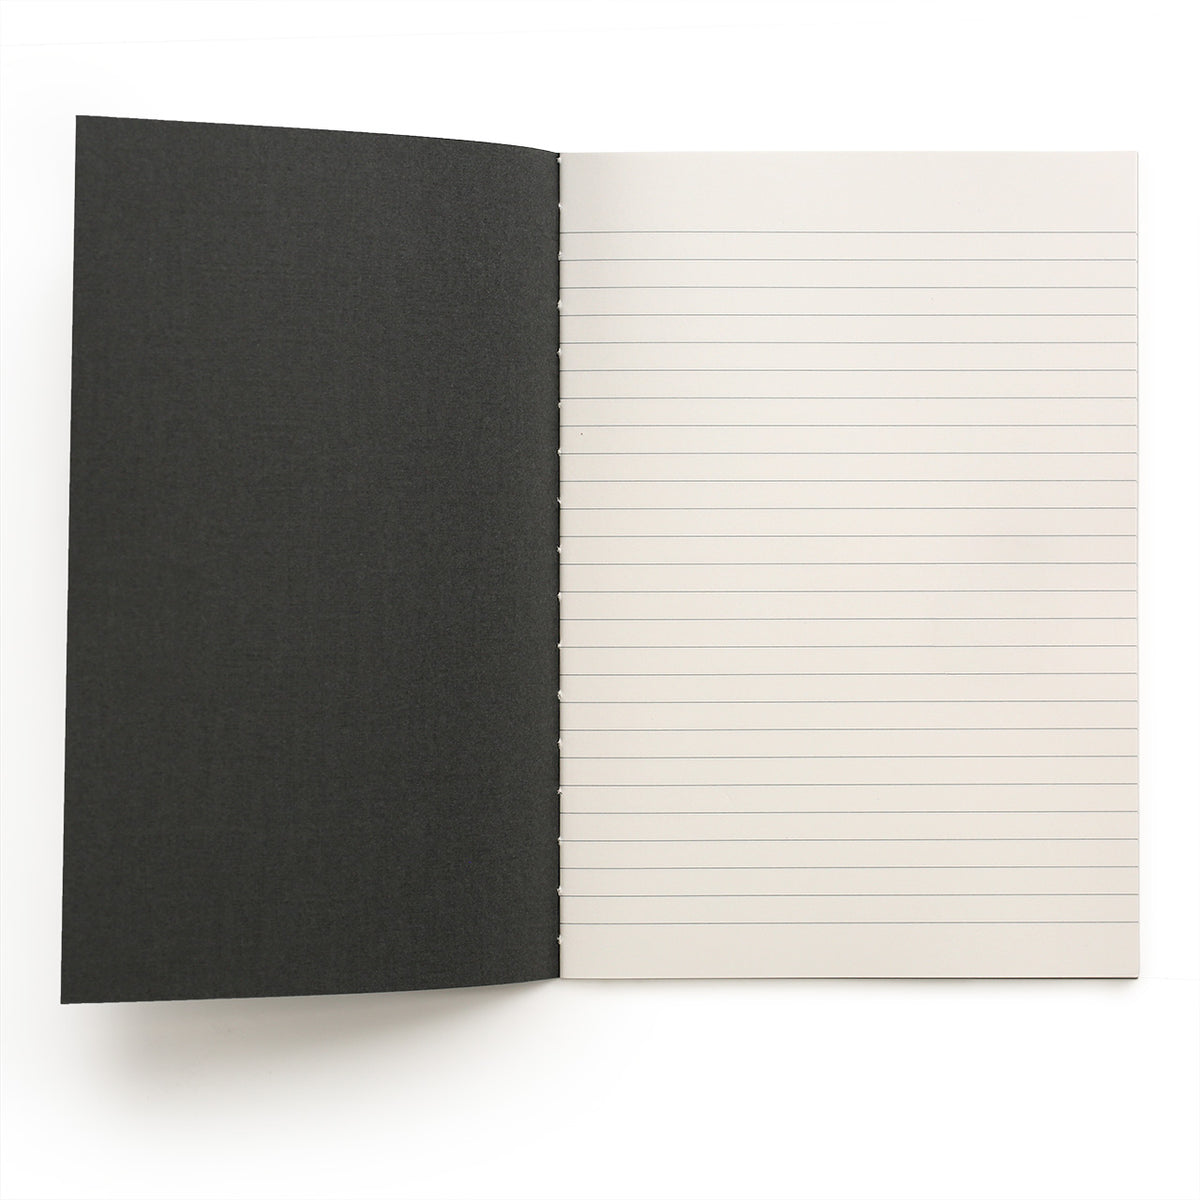 Inside front cover of the Apica A4 notebook showing that it can open very flat and has grey ruled lines and stitched spine